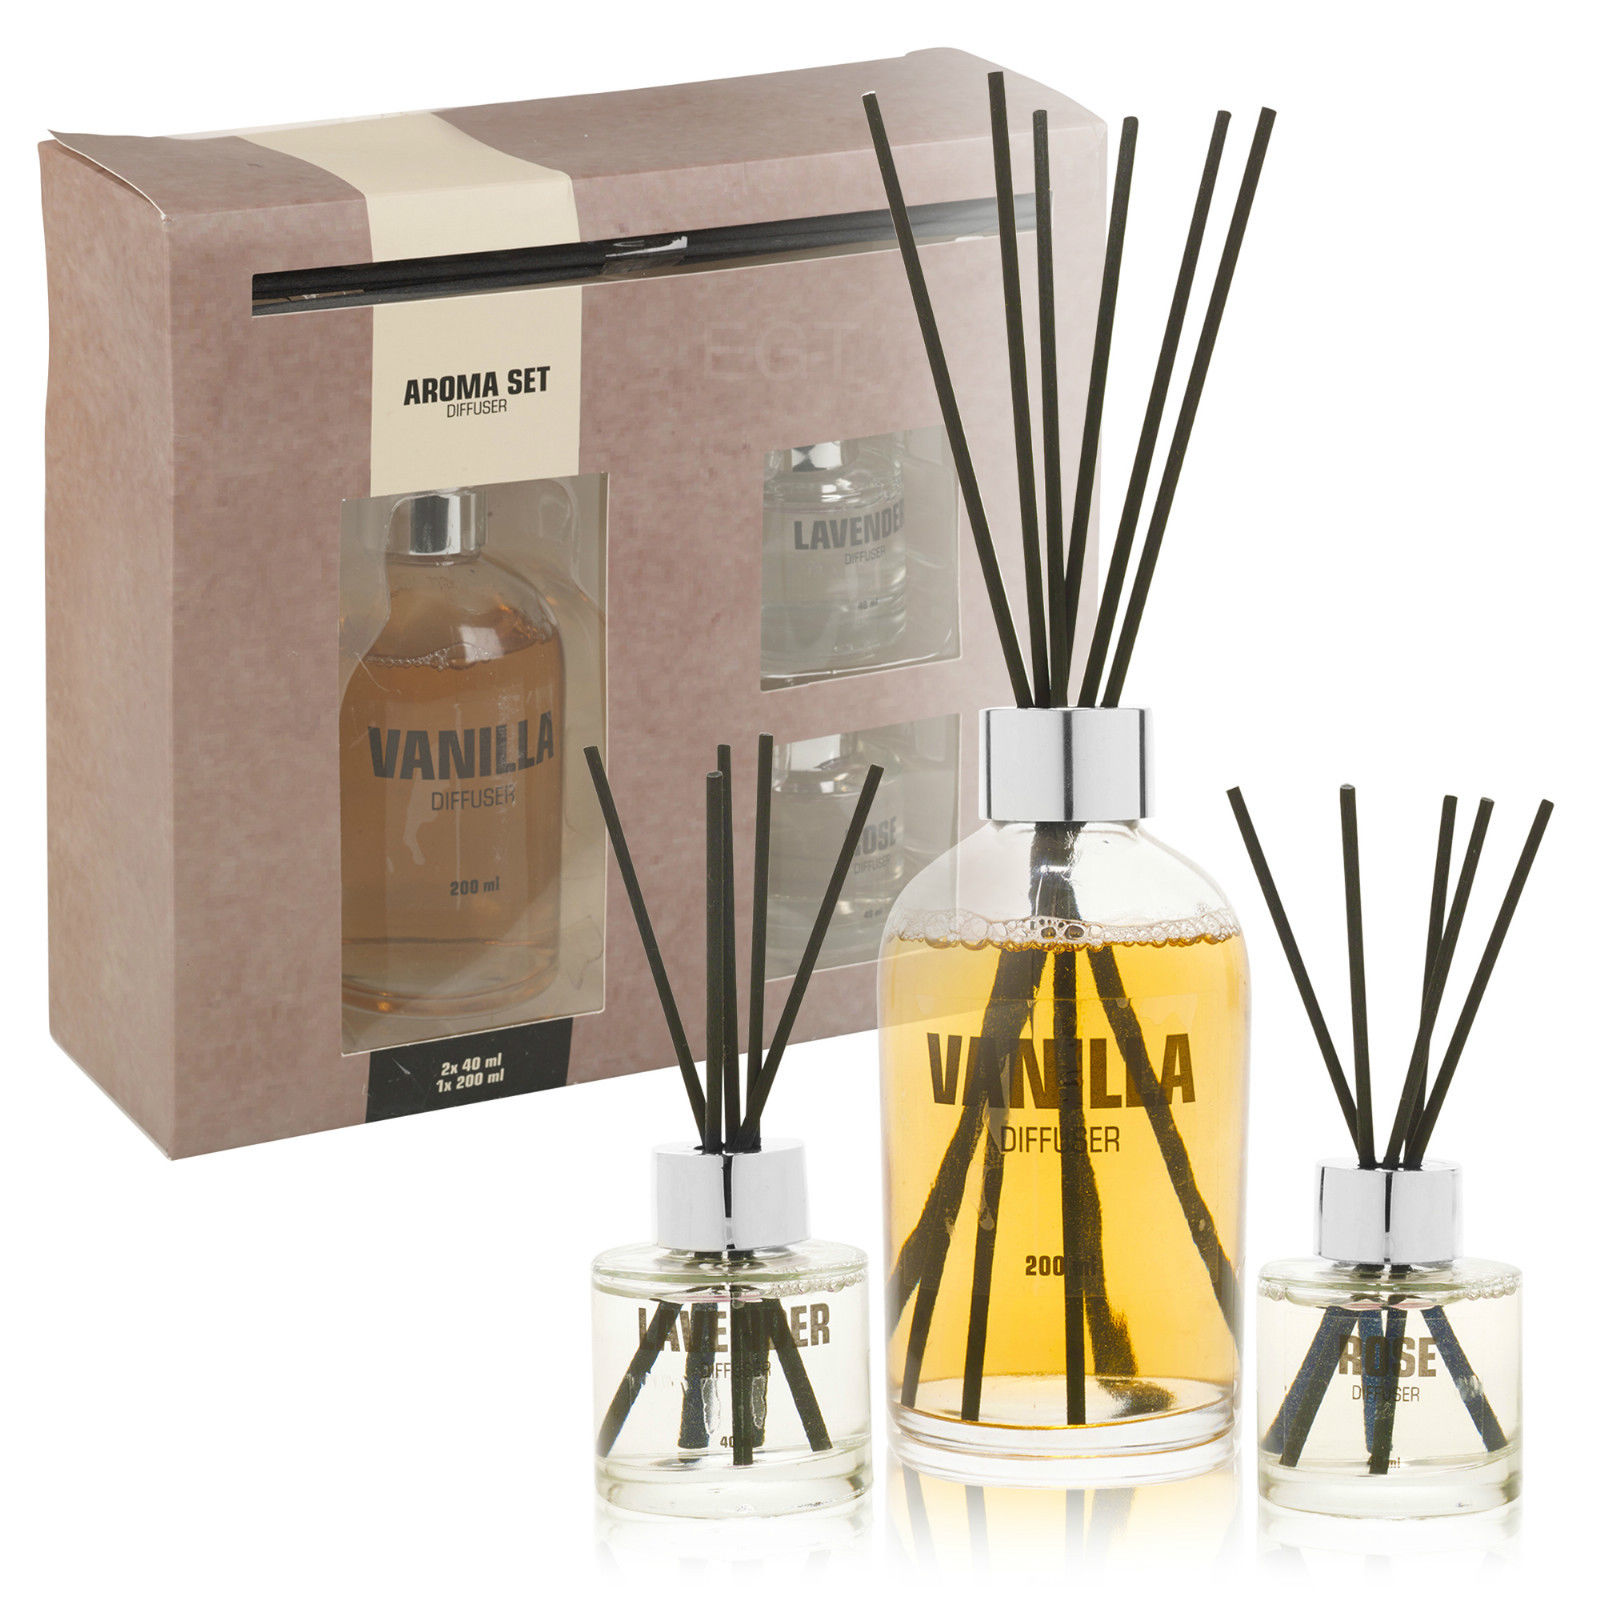 Fragrance Reed Diffuser For Aromatherapy Gift Set 3 Scents Fragrant Home Air Freshener Aroma Diffuser New